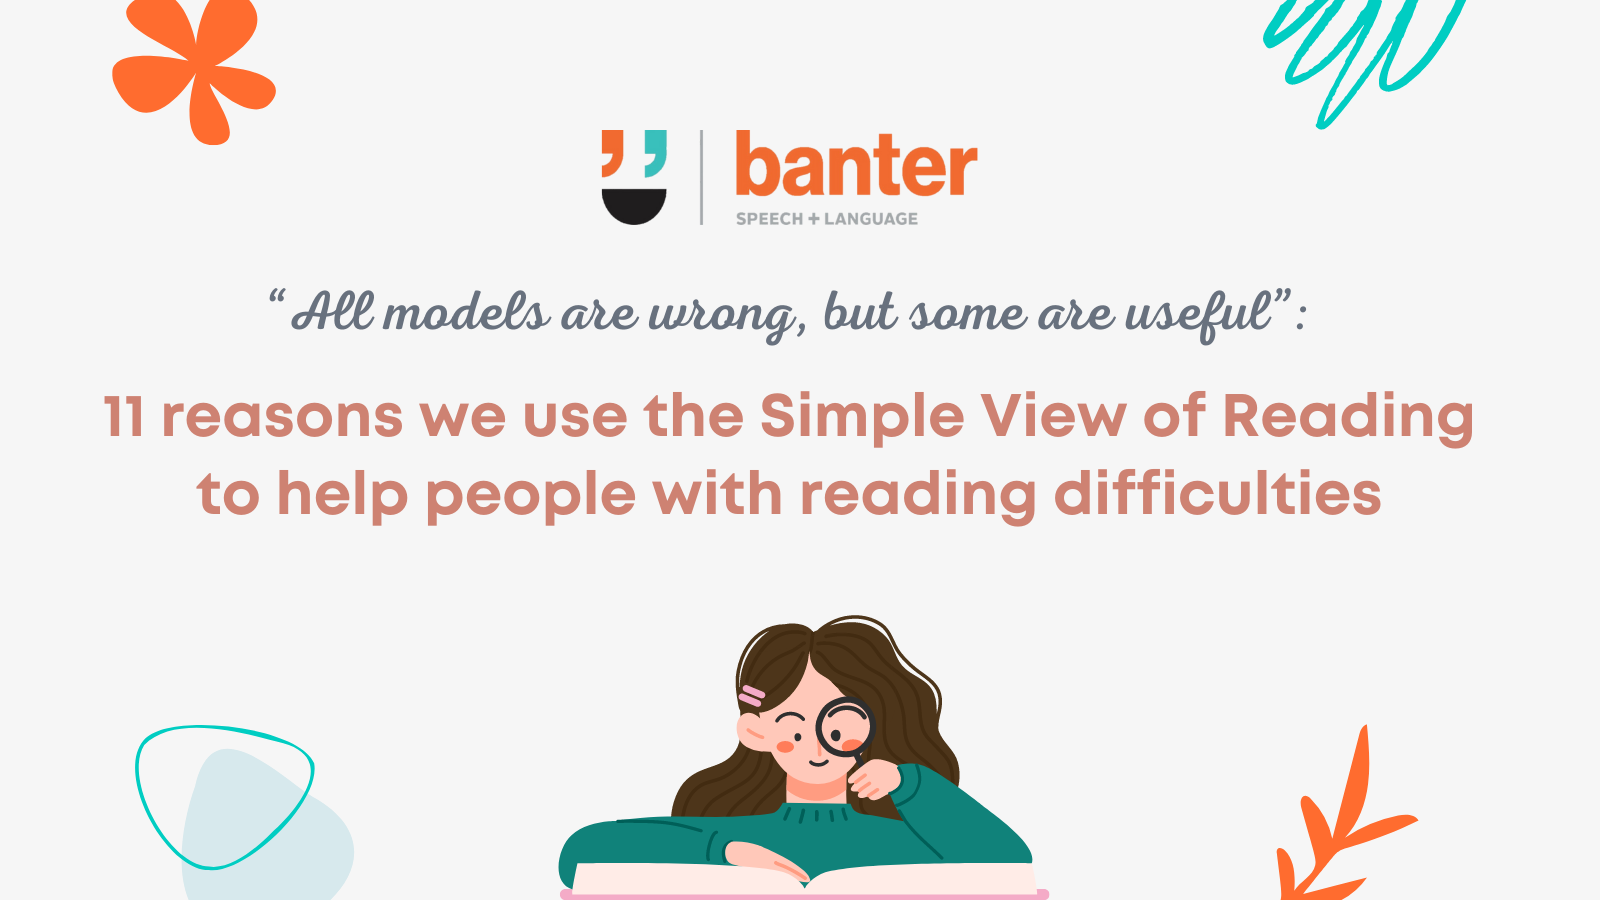 11 reasons we use the Simple View of Reading to help people with reading difficulties